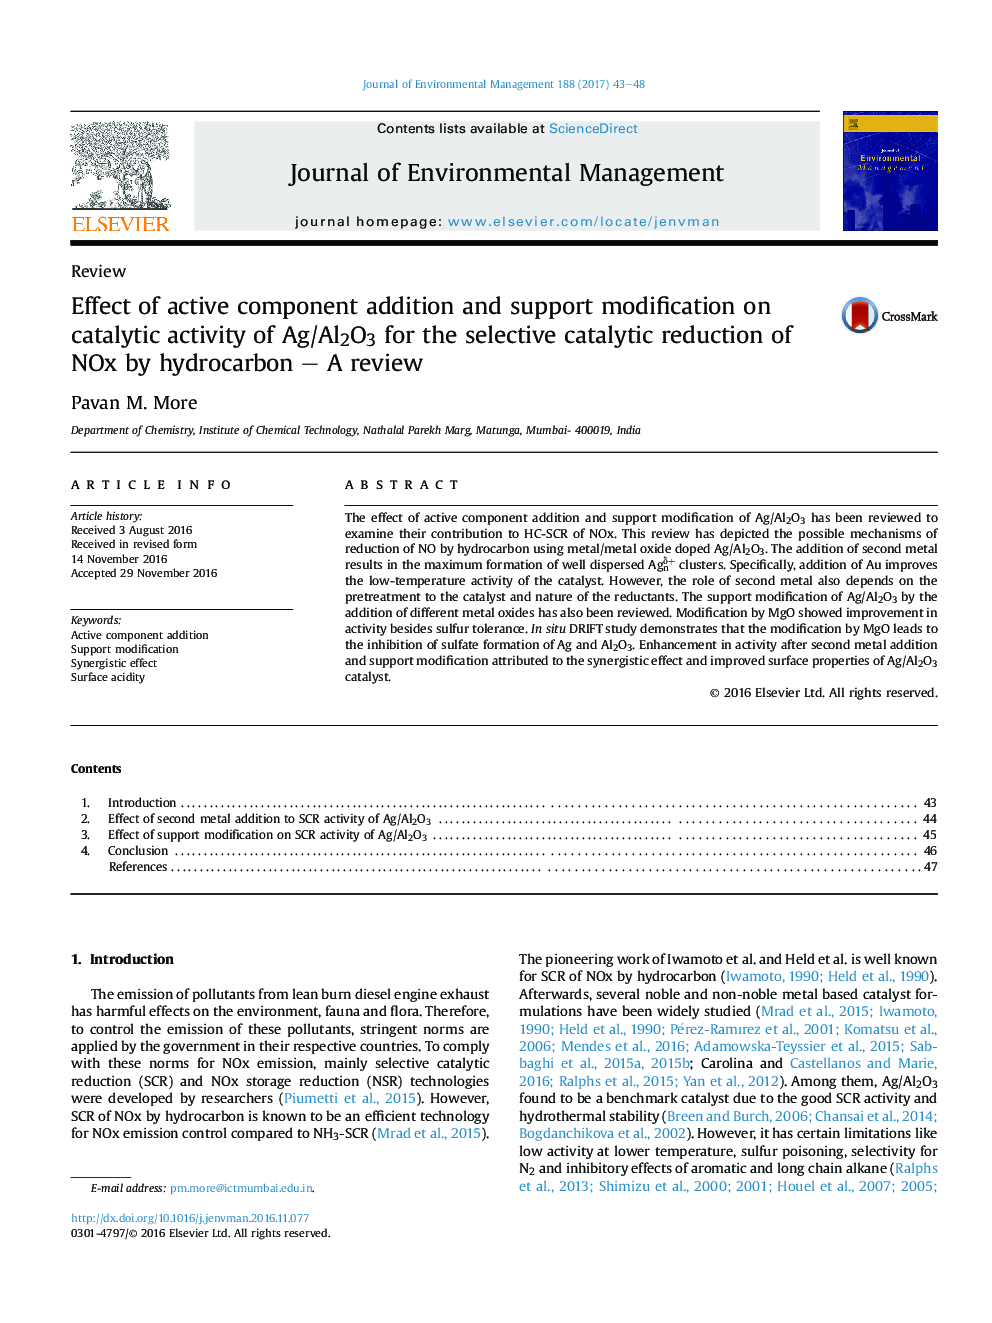 Effect of active component addition and support modification on catalytic activity of Ag/Al2O3 for the selective catalytic reduction of NOx by hydrocarbon - A review